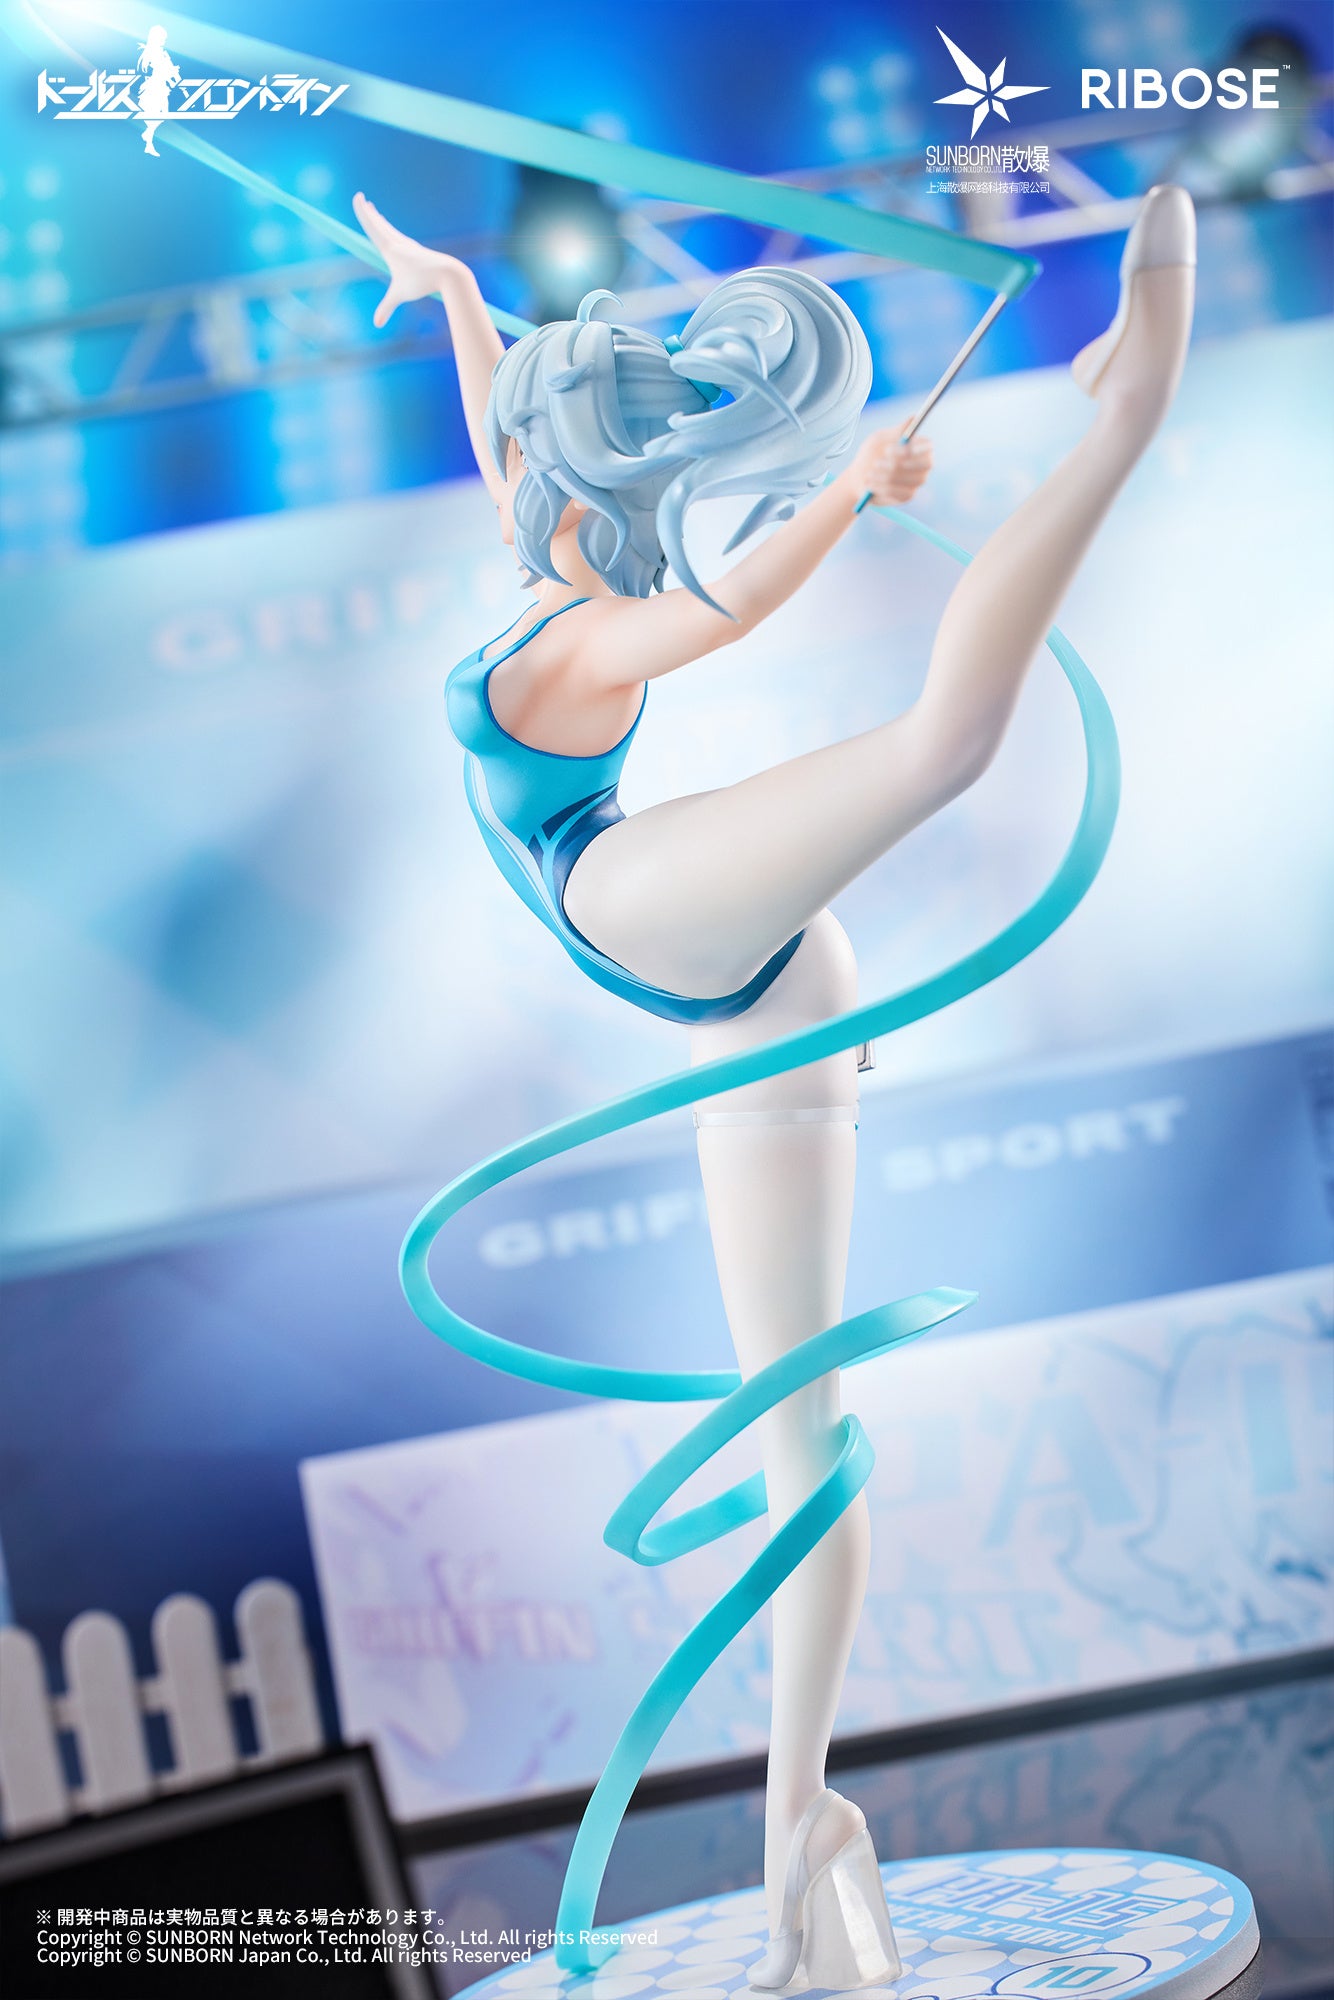 [Pre-order] Girls' Frontline - PA-15: RISE UP (Dance in the Ice Sea Ver.) - Ribose